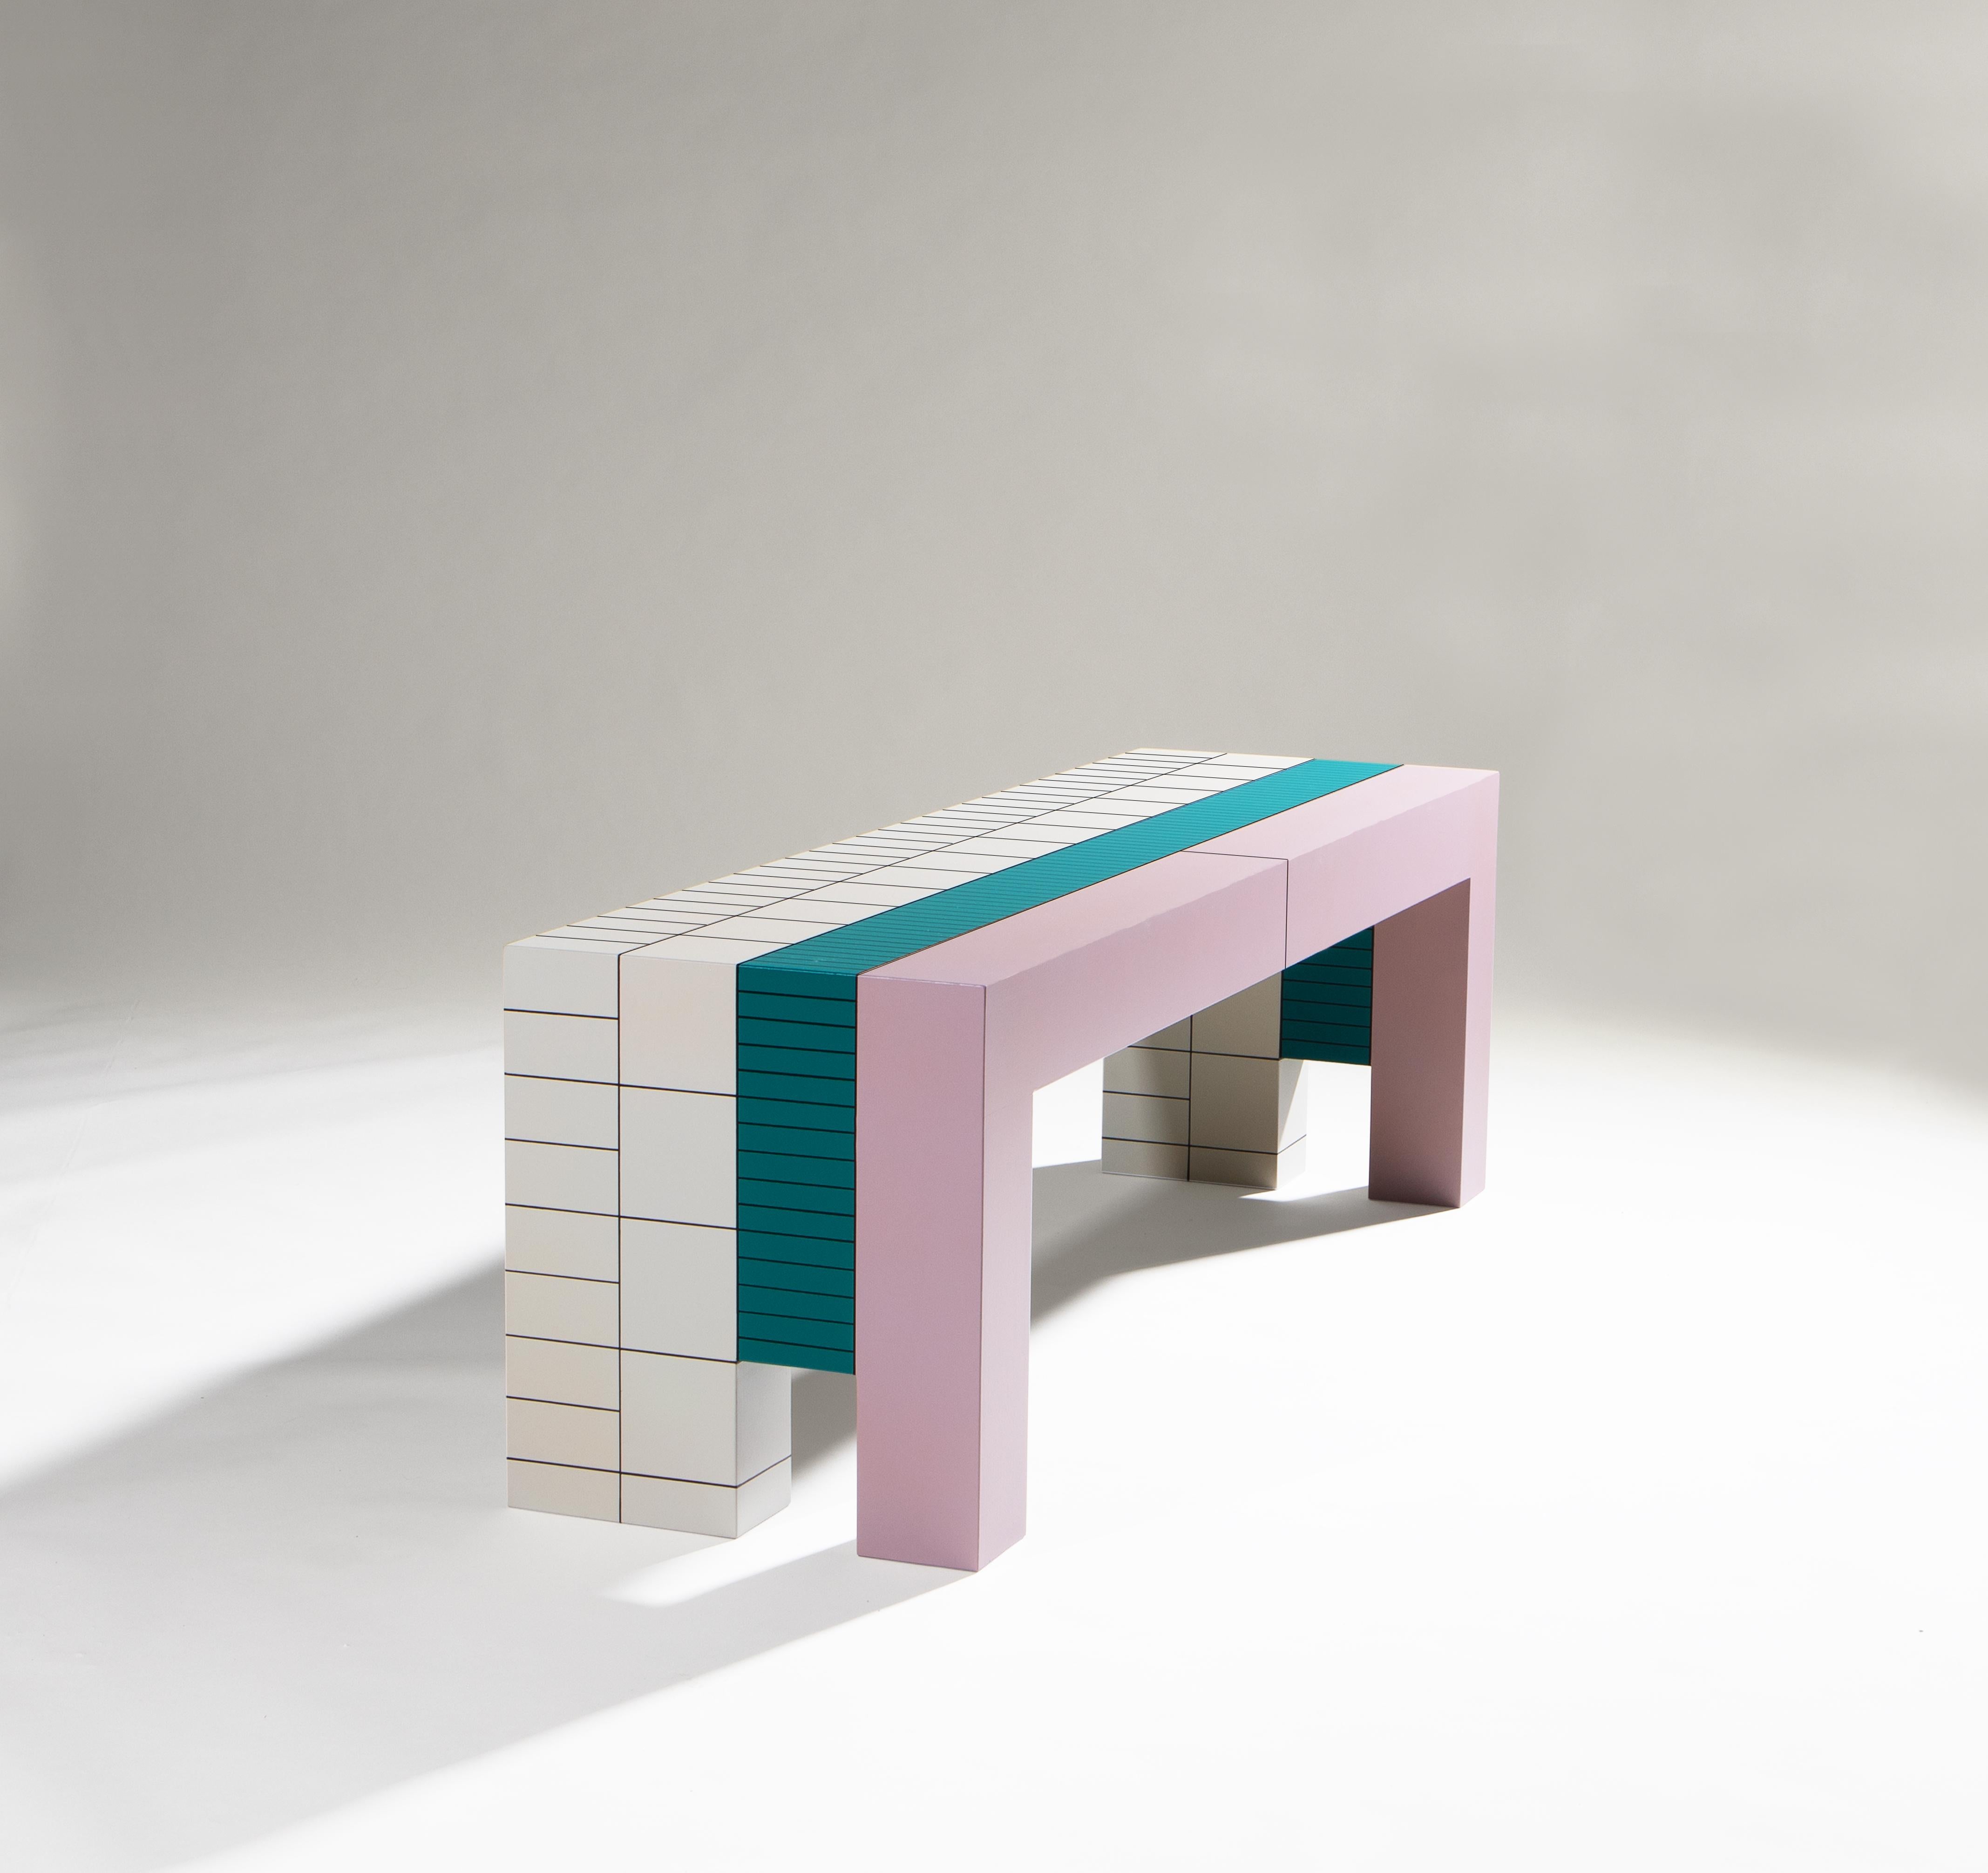 Seating and low table, interchangeable according to desire. Handpainted hardwood structure embellished with hand-drawn graphic details designed by the author, then protected with a clear matte scratchproof and waterproof varnish.

Shade of colors